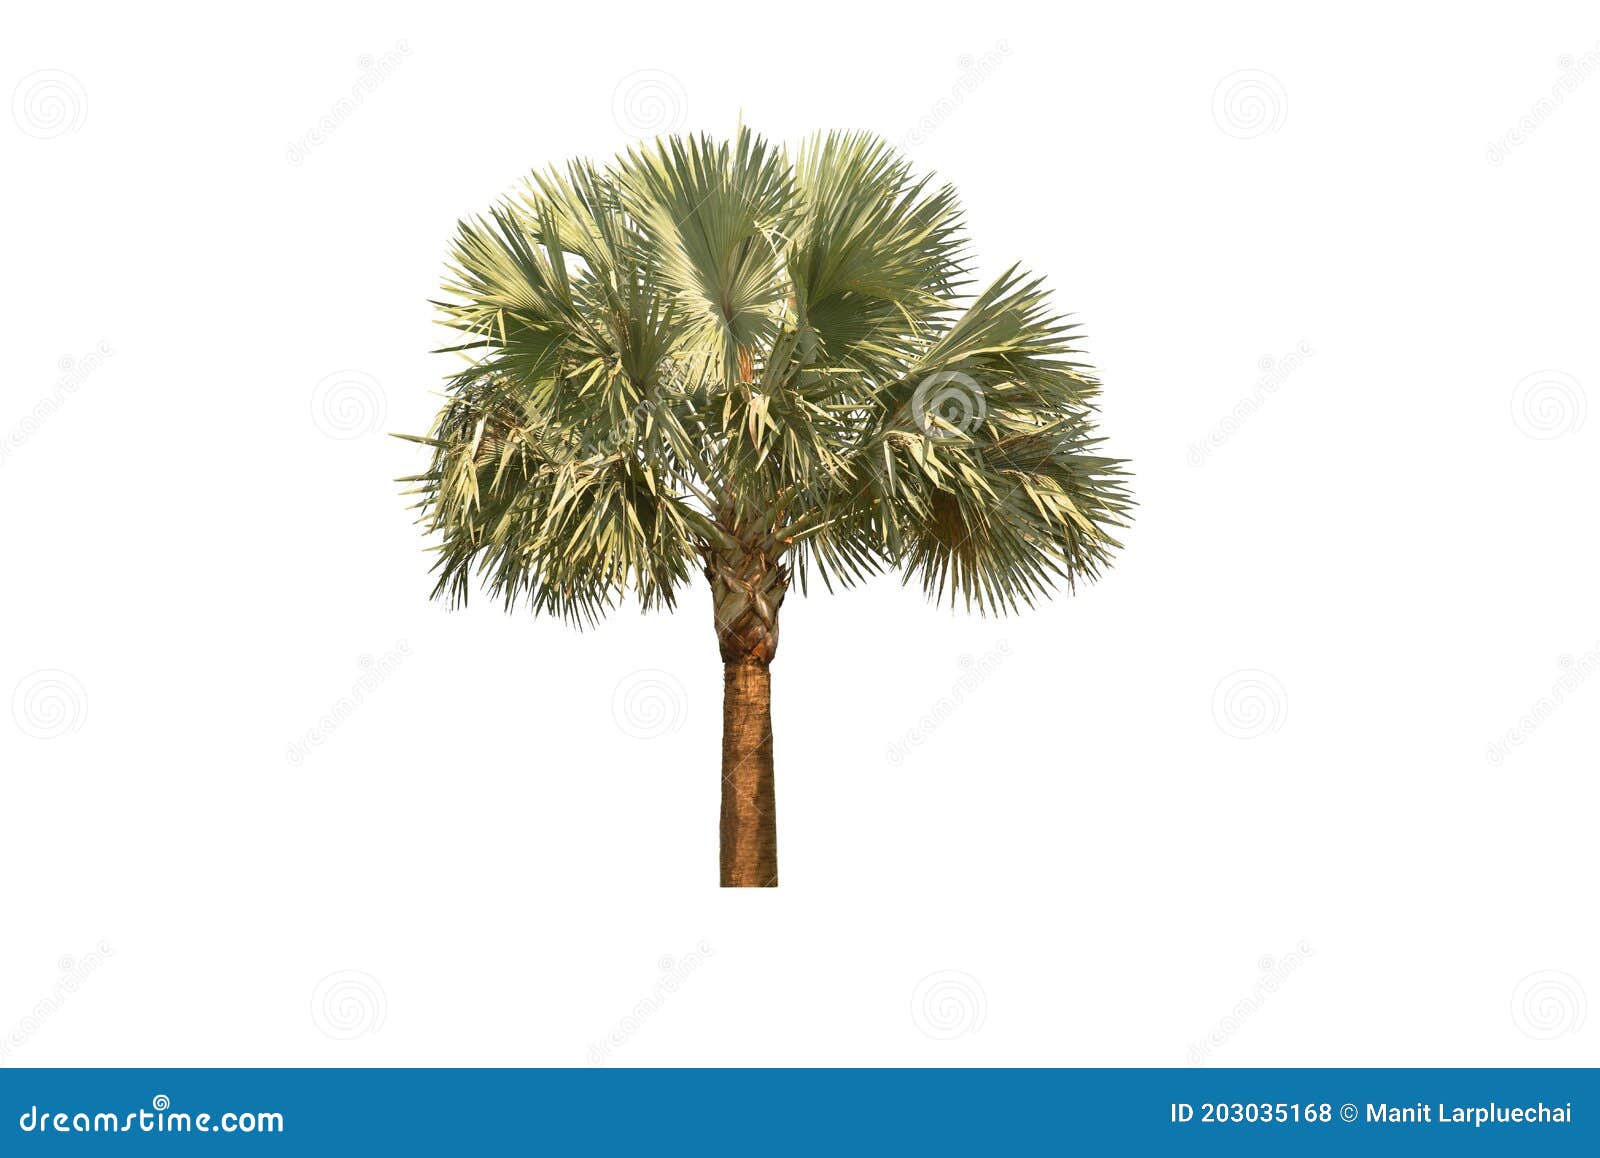 palm tree  on white background with clipping paths.